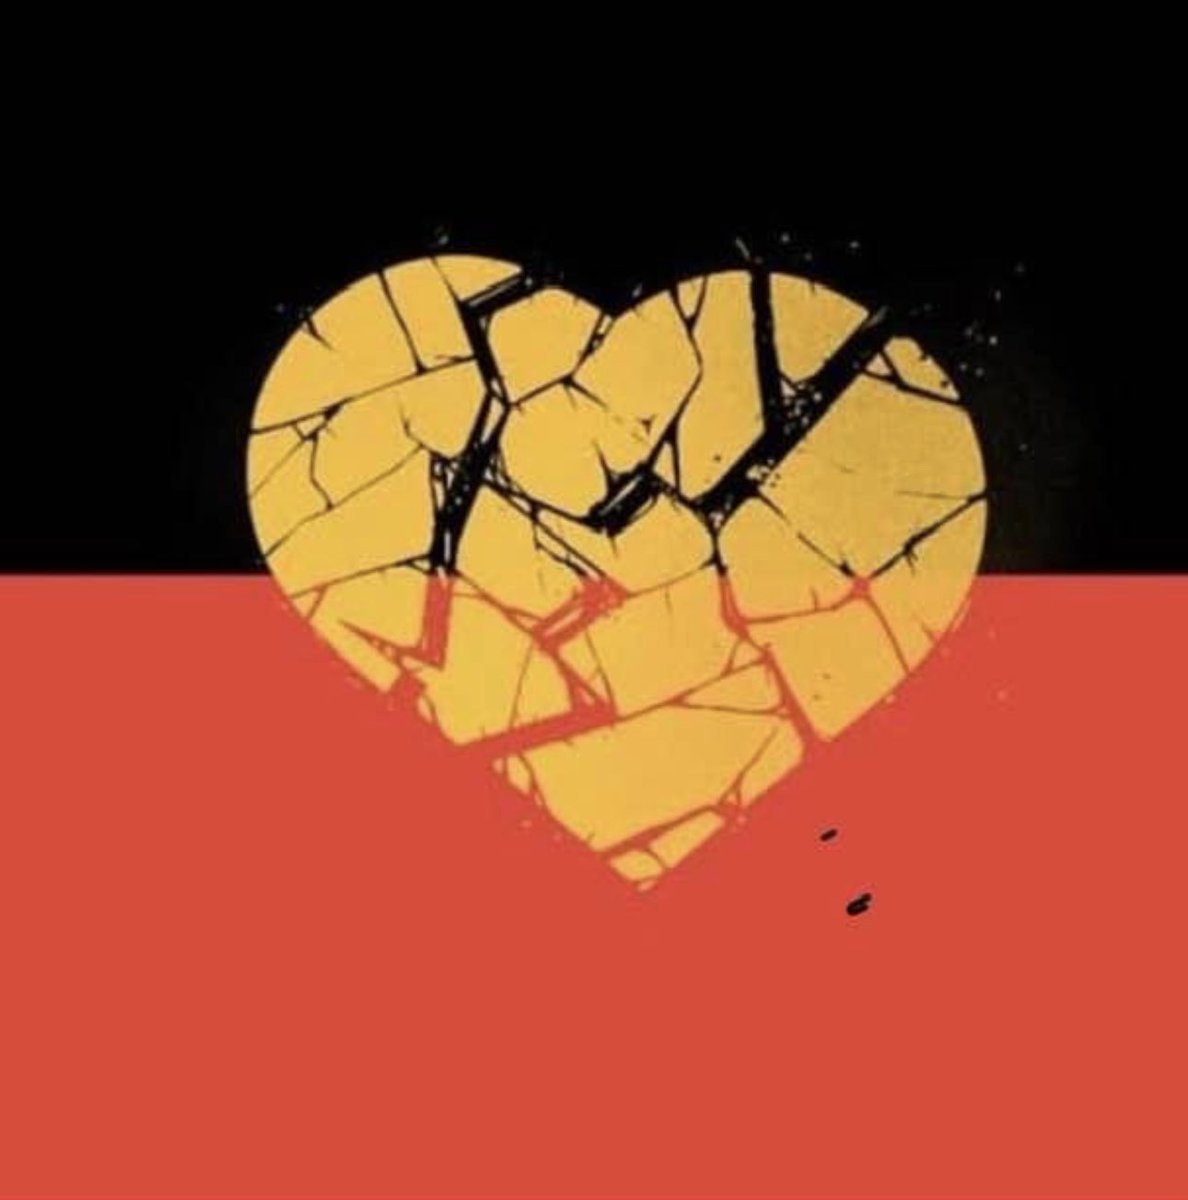 Feeling hopeless tonight, but tomorrow is a new day for recovery and reconciliation where we can continue to walk together for a better future for Aboriginal and Torres Strait Islander people #voicetreatytruth #AlwaysWasAlwaysWillBe